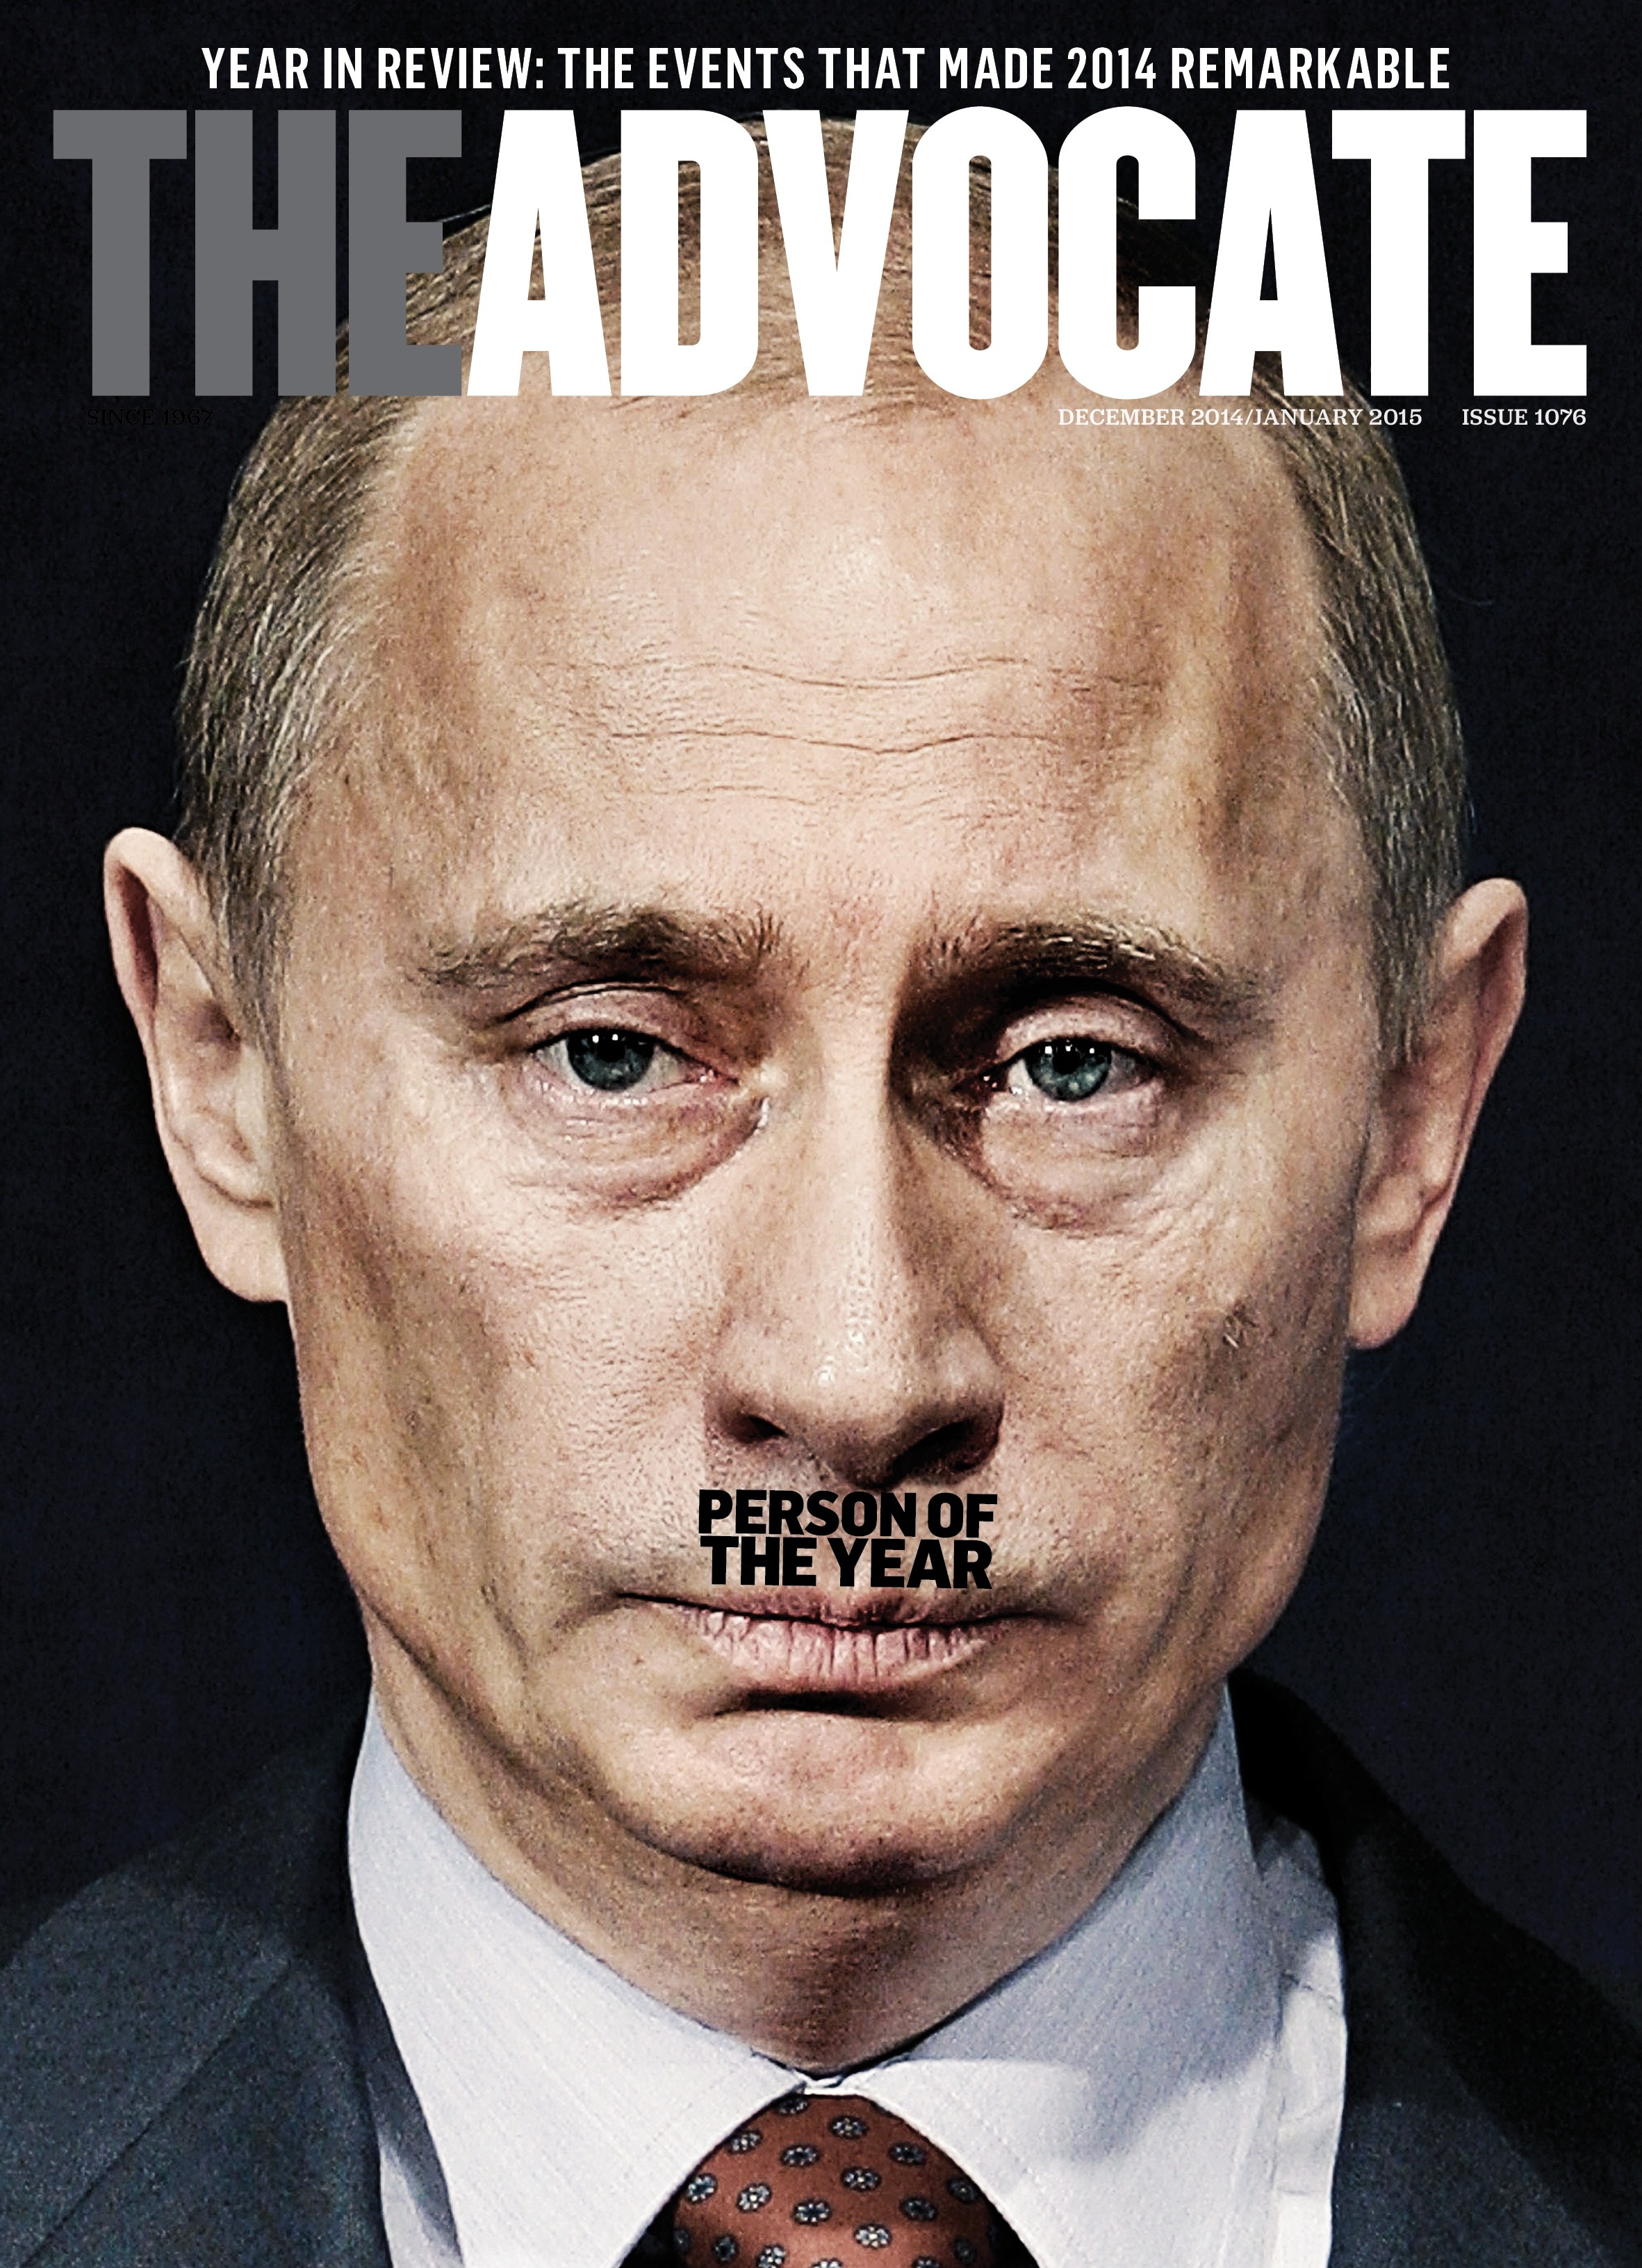 The Advocate-December 2014/January 2015, "Person of the Year"